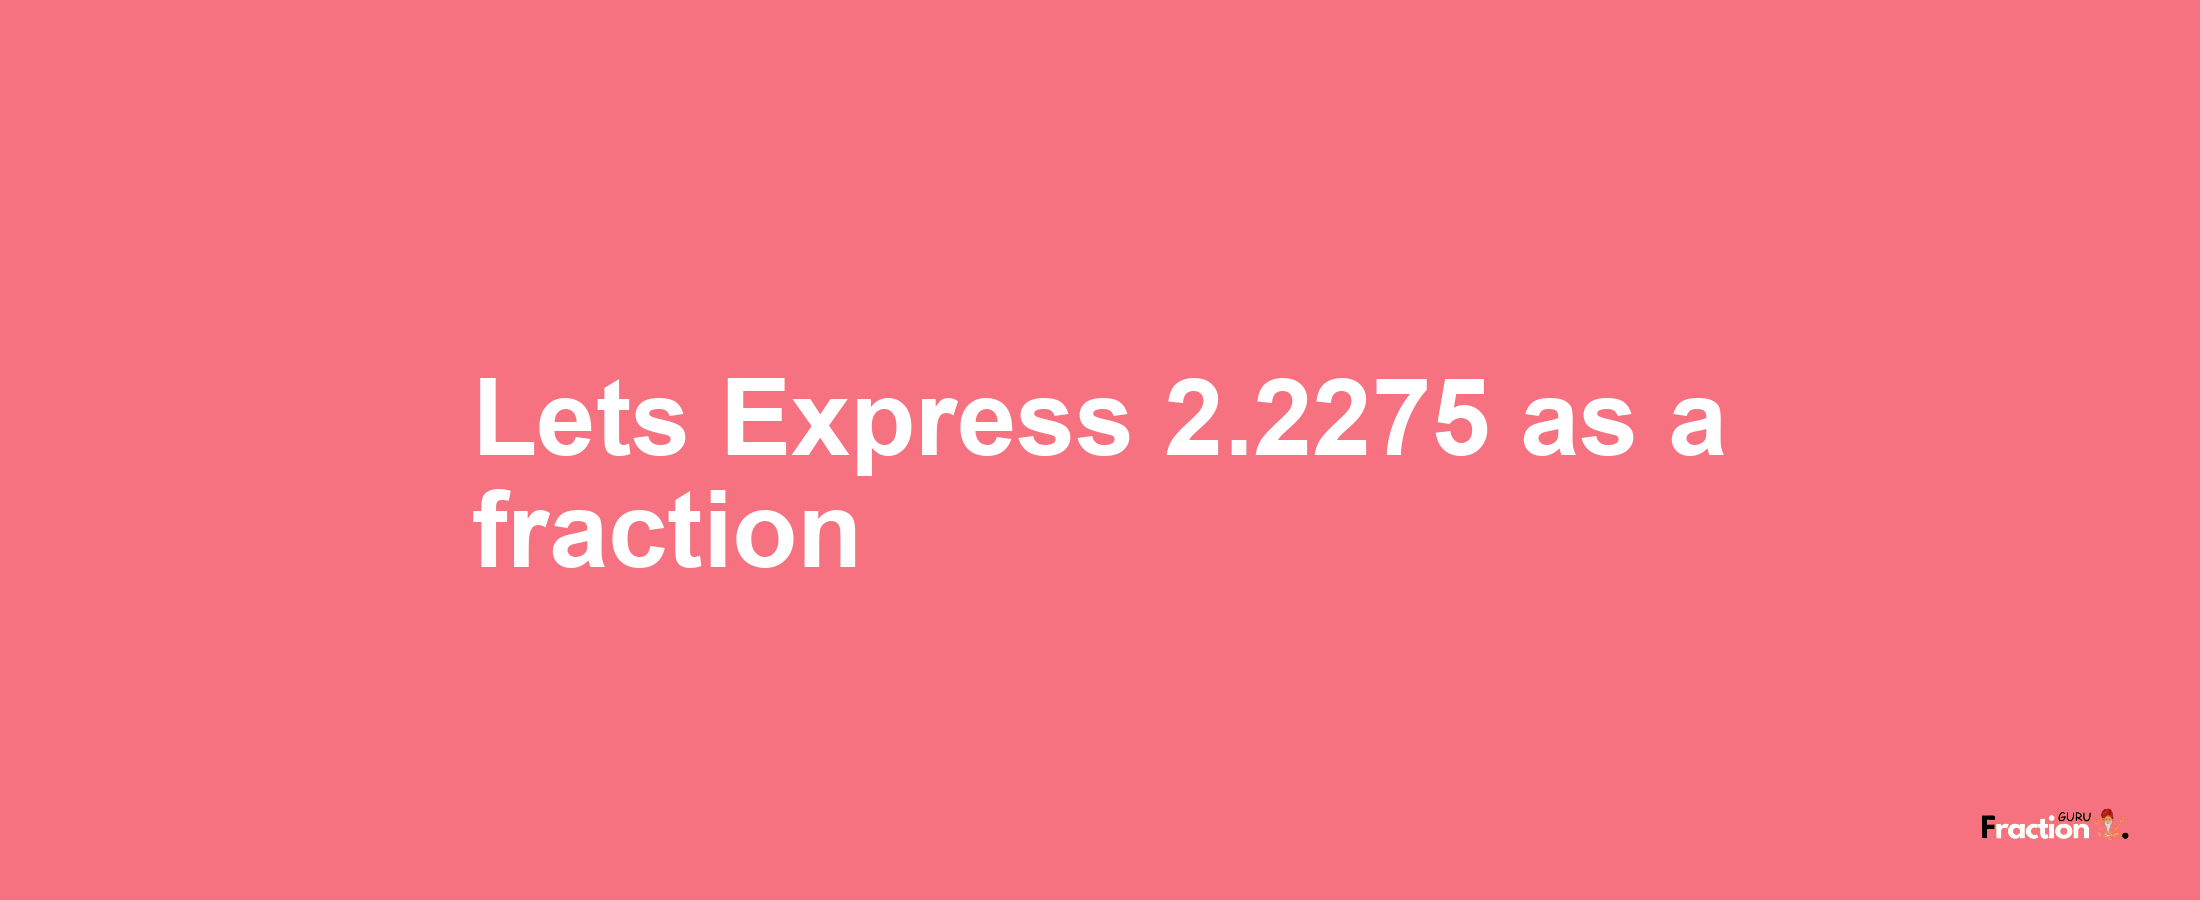 Lets Express 2.2275 as afraction